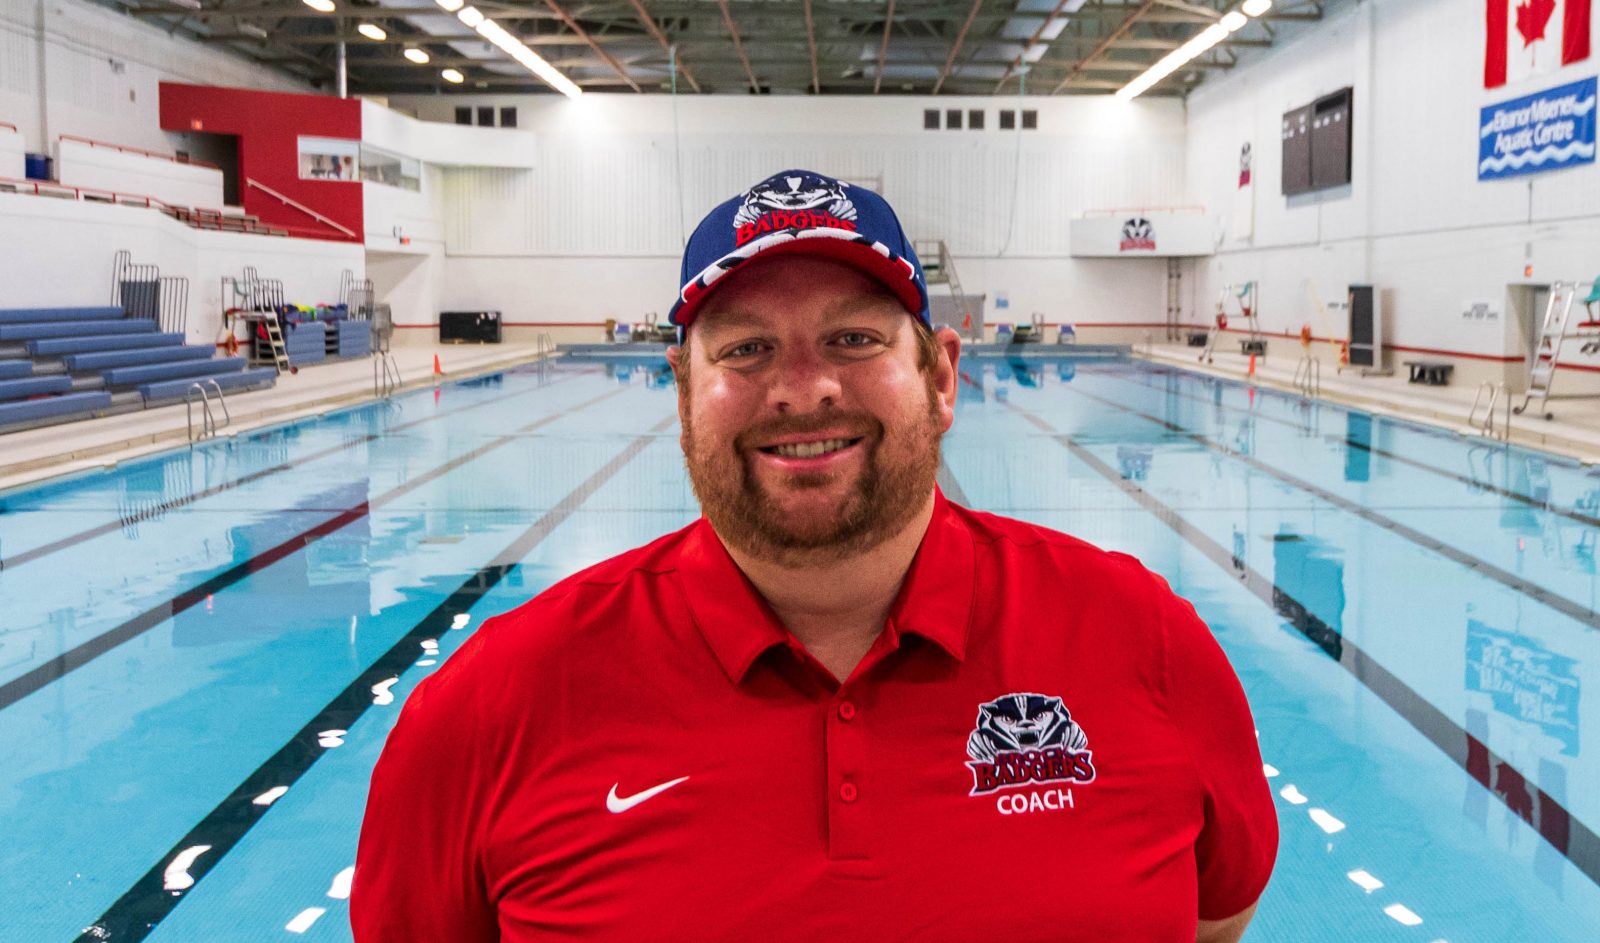 A man in a red Brock Badgers polo shirt and blue Brock Badgers baseball cap stands in front of a swimming pool.